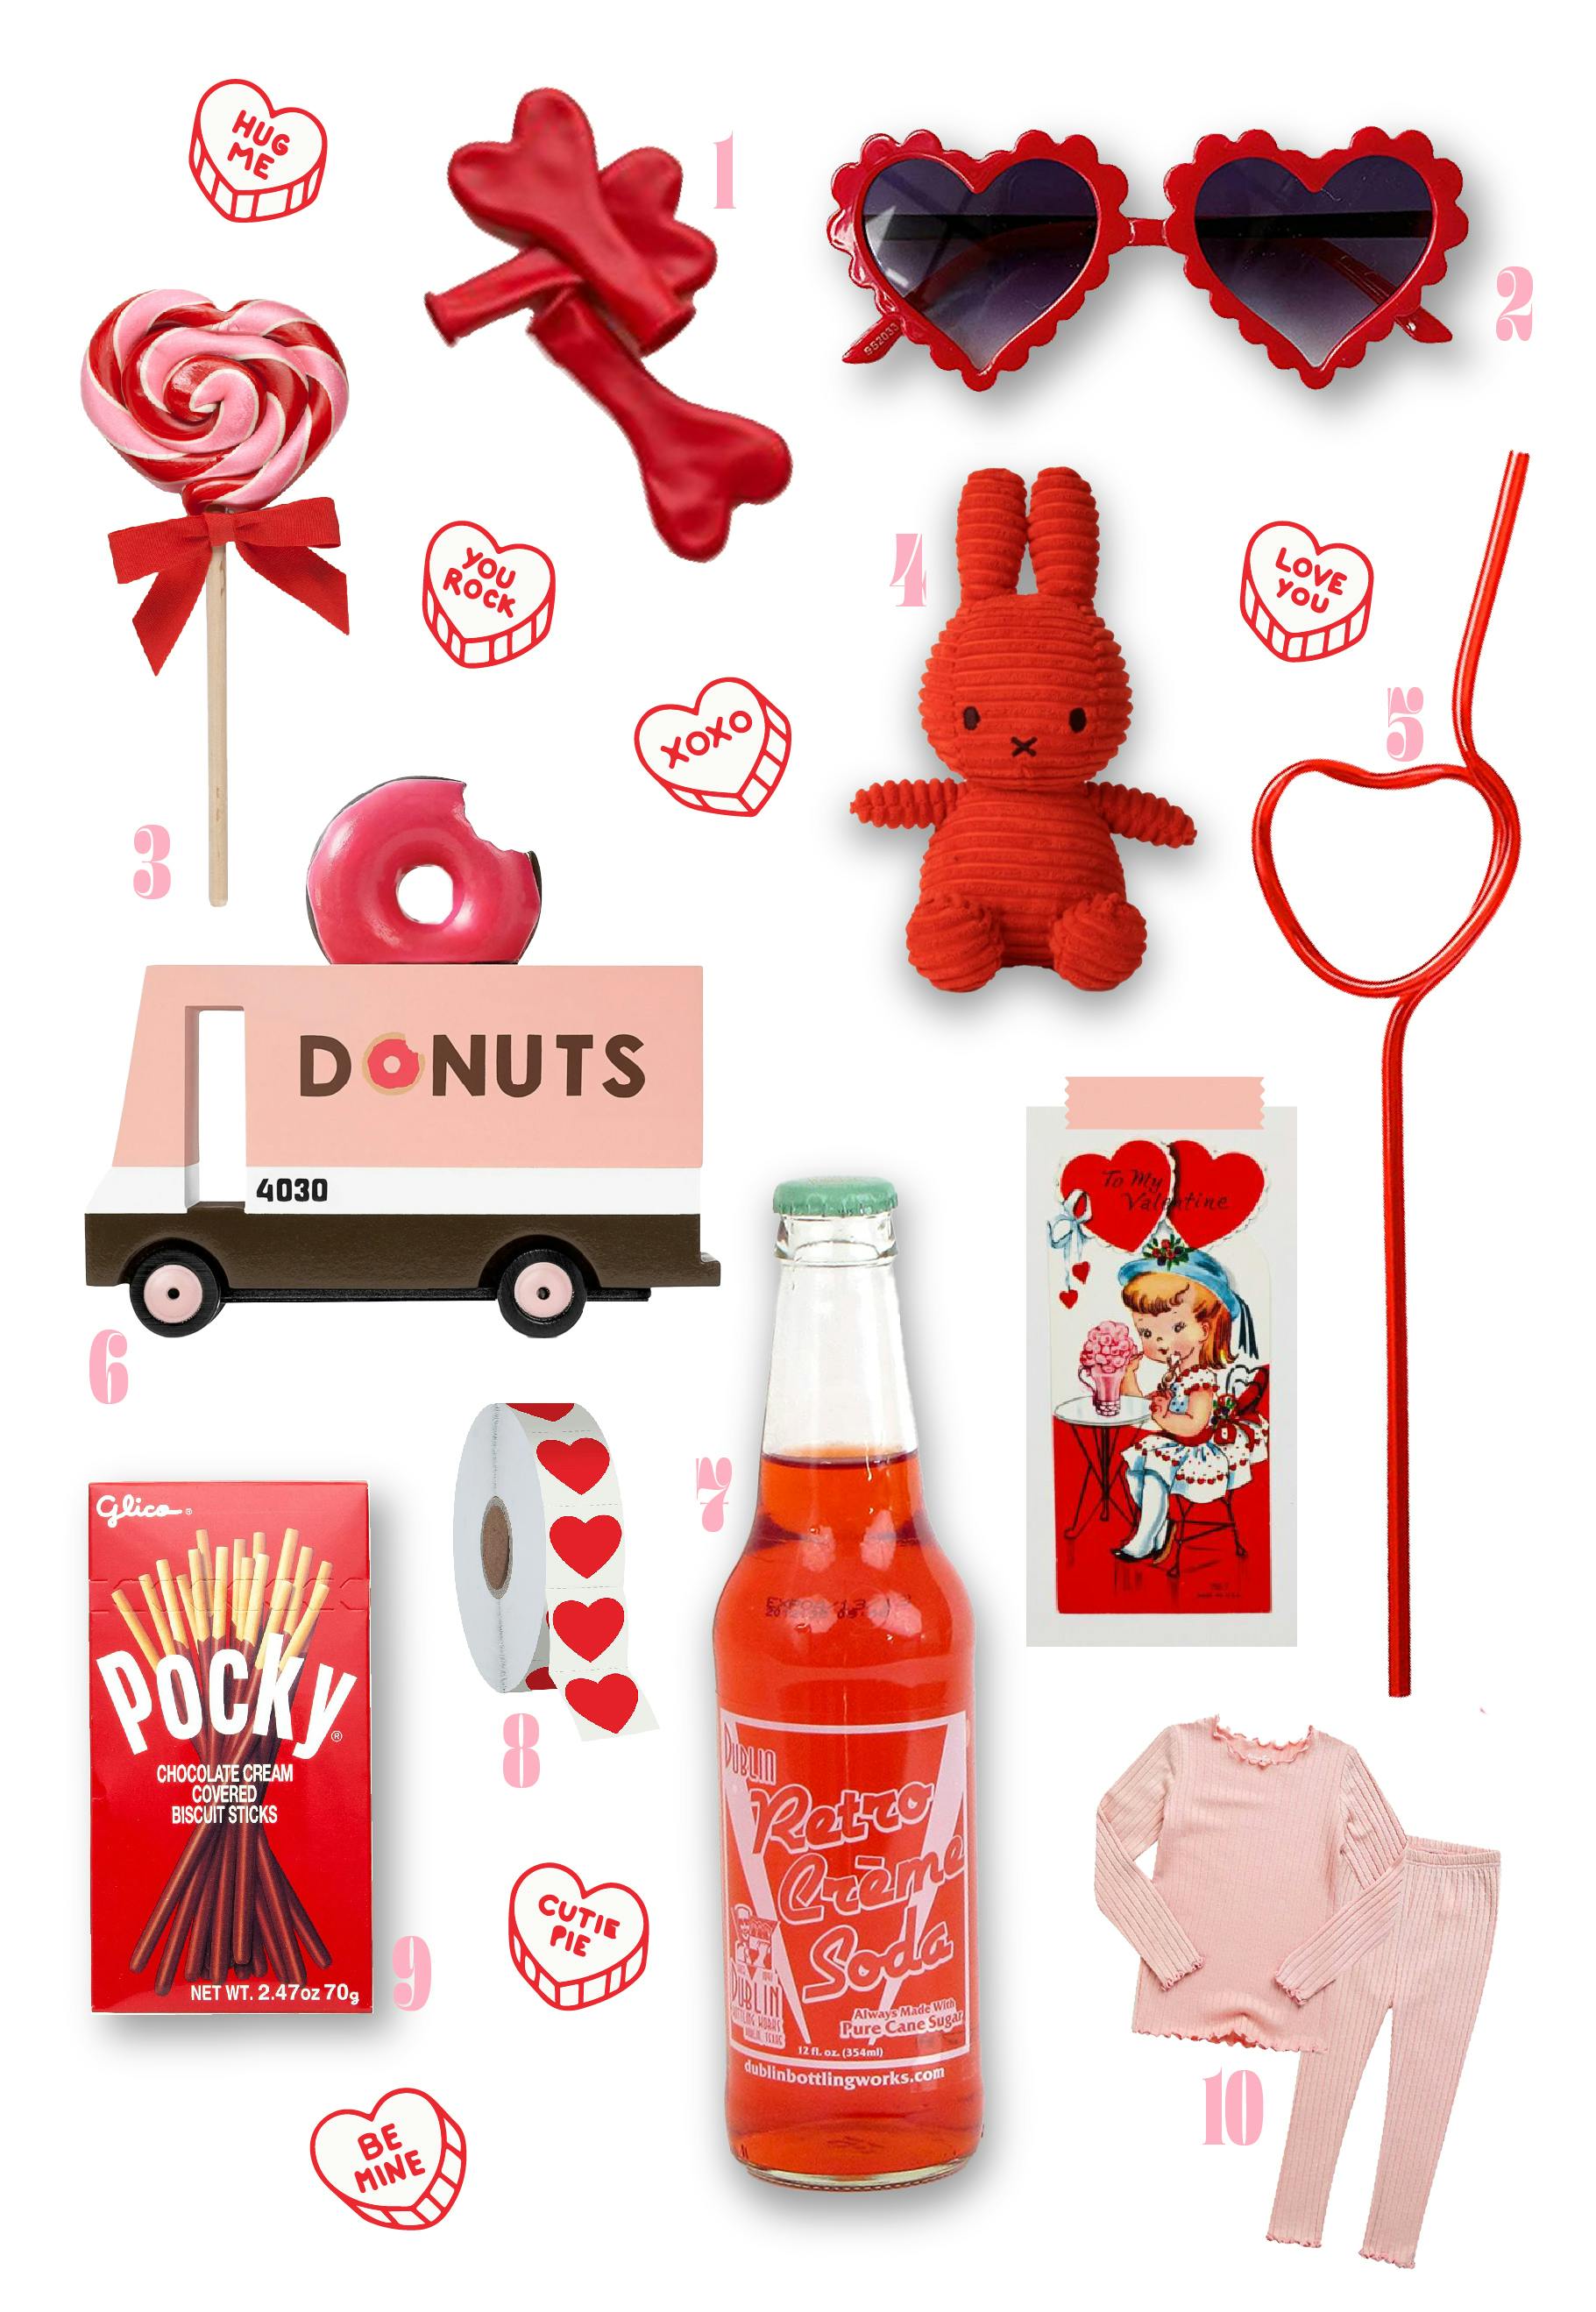 10 Great Gift Ideas for Kids this Valentine's Day